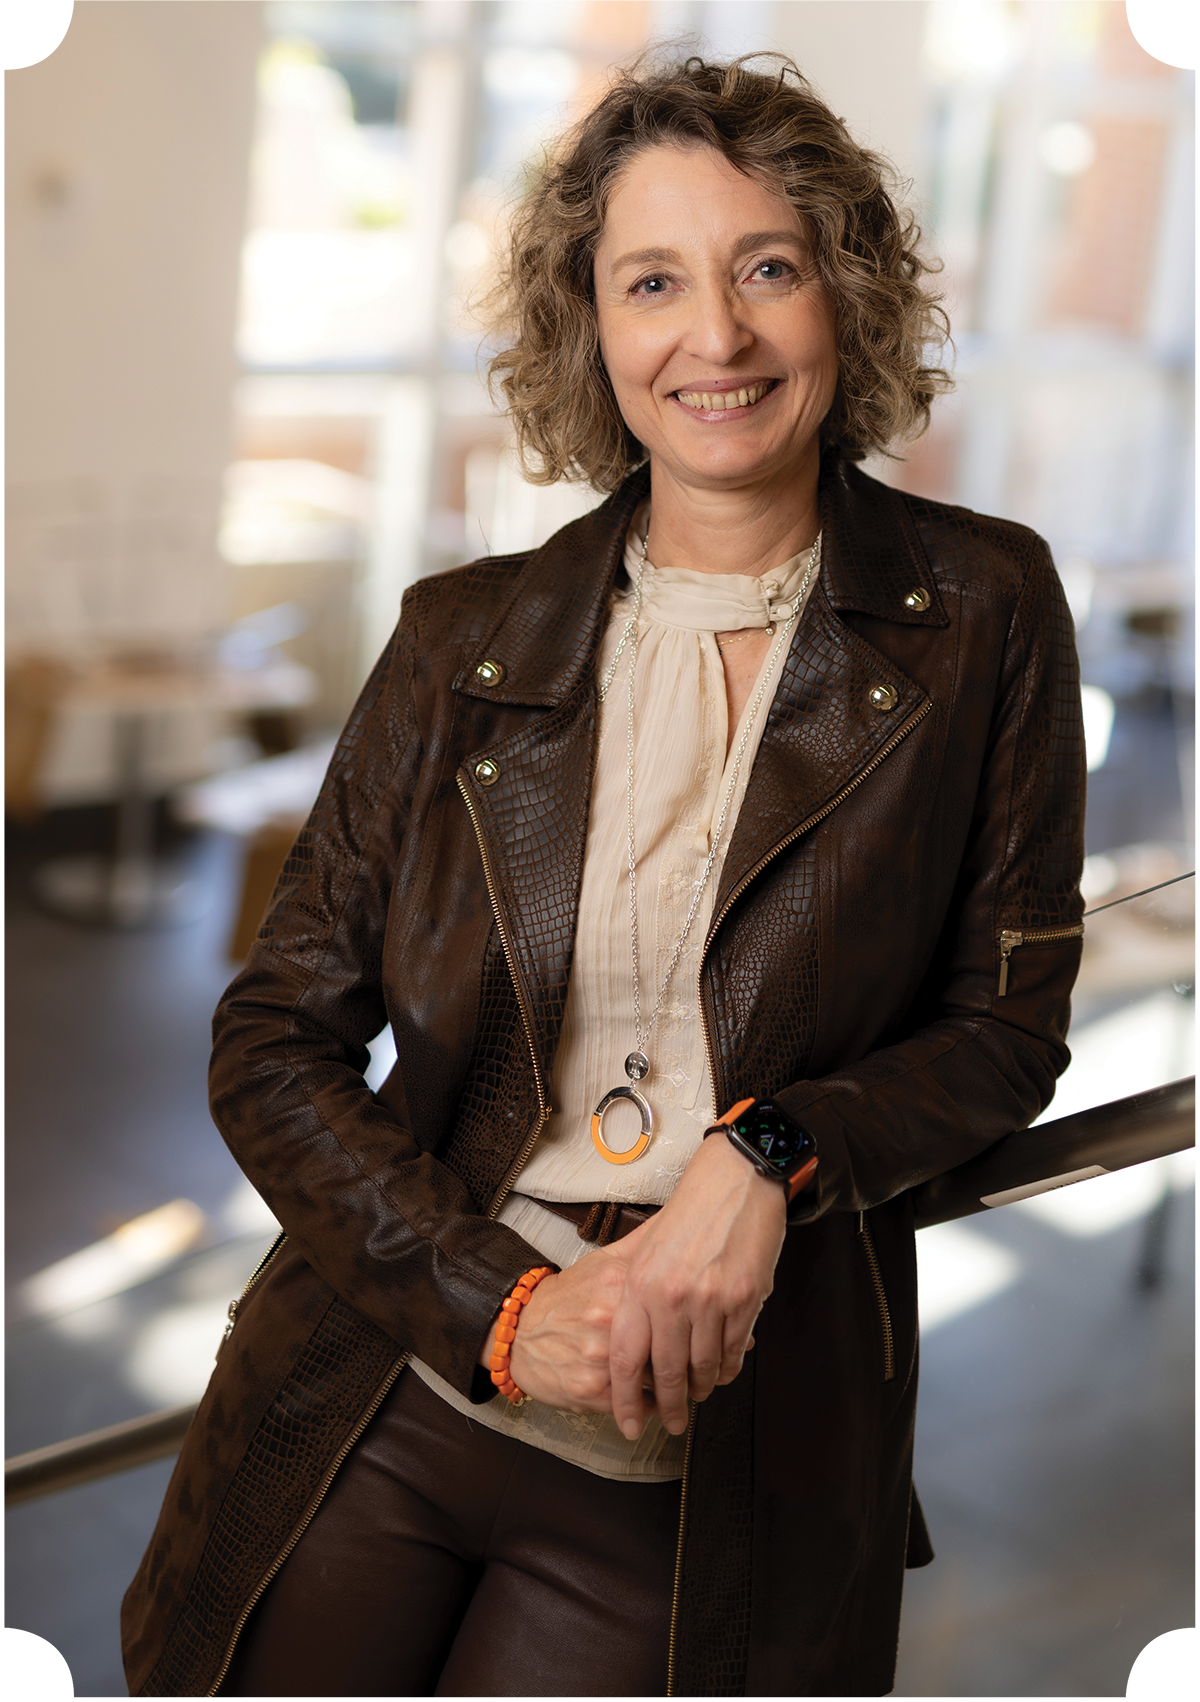 Dean Ozlem Kilic stands in the Tickle College of Engineering